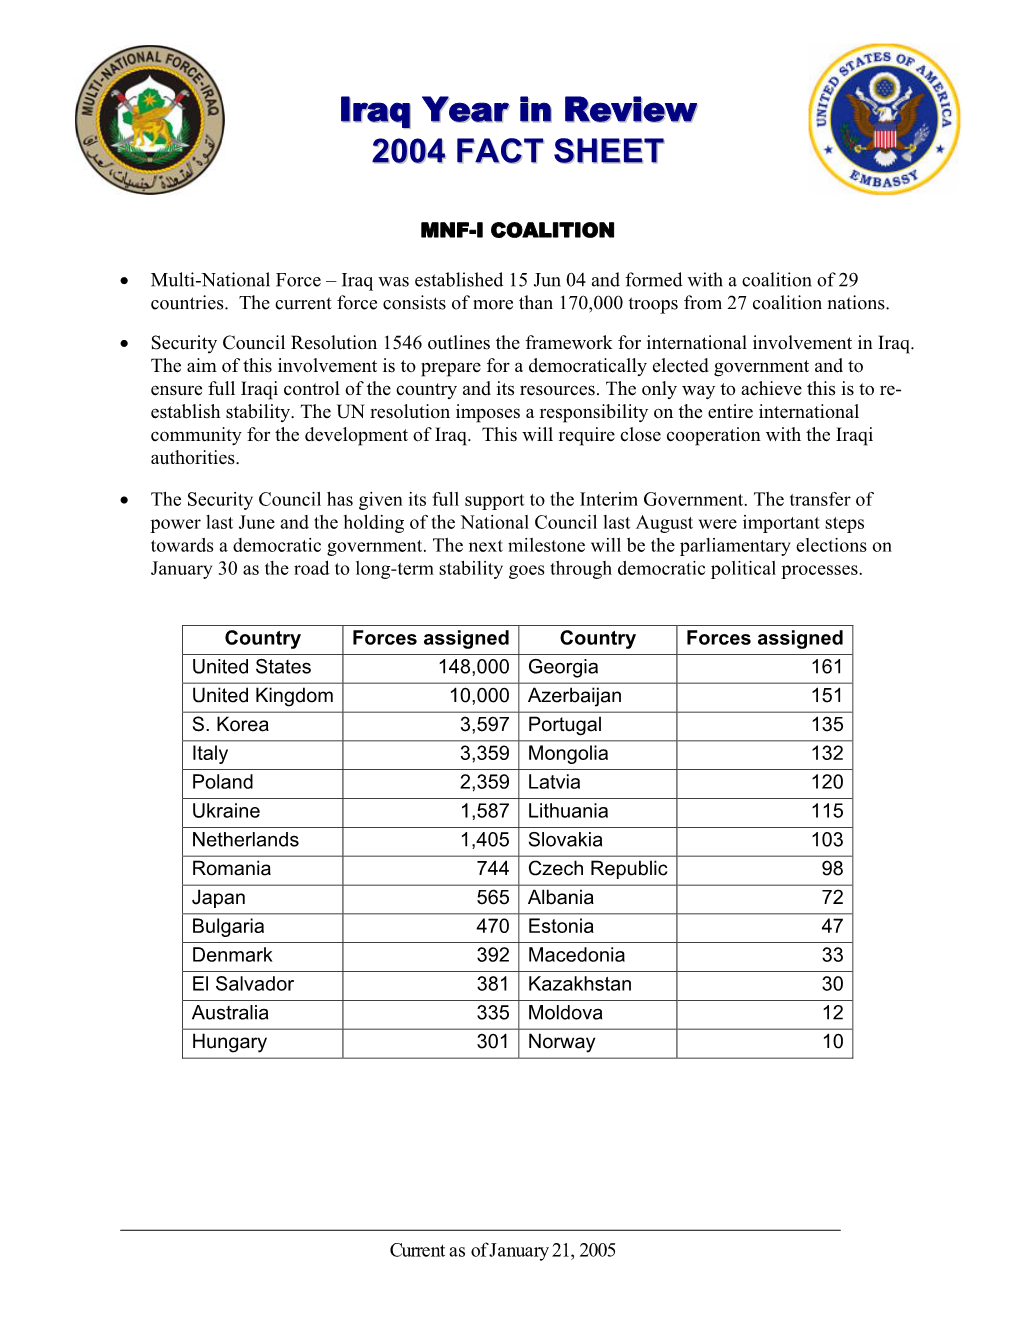 Iraq Year in Review 2004 FACT SHEET